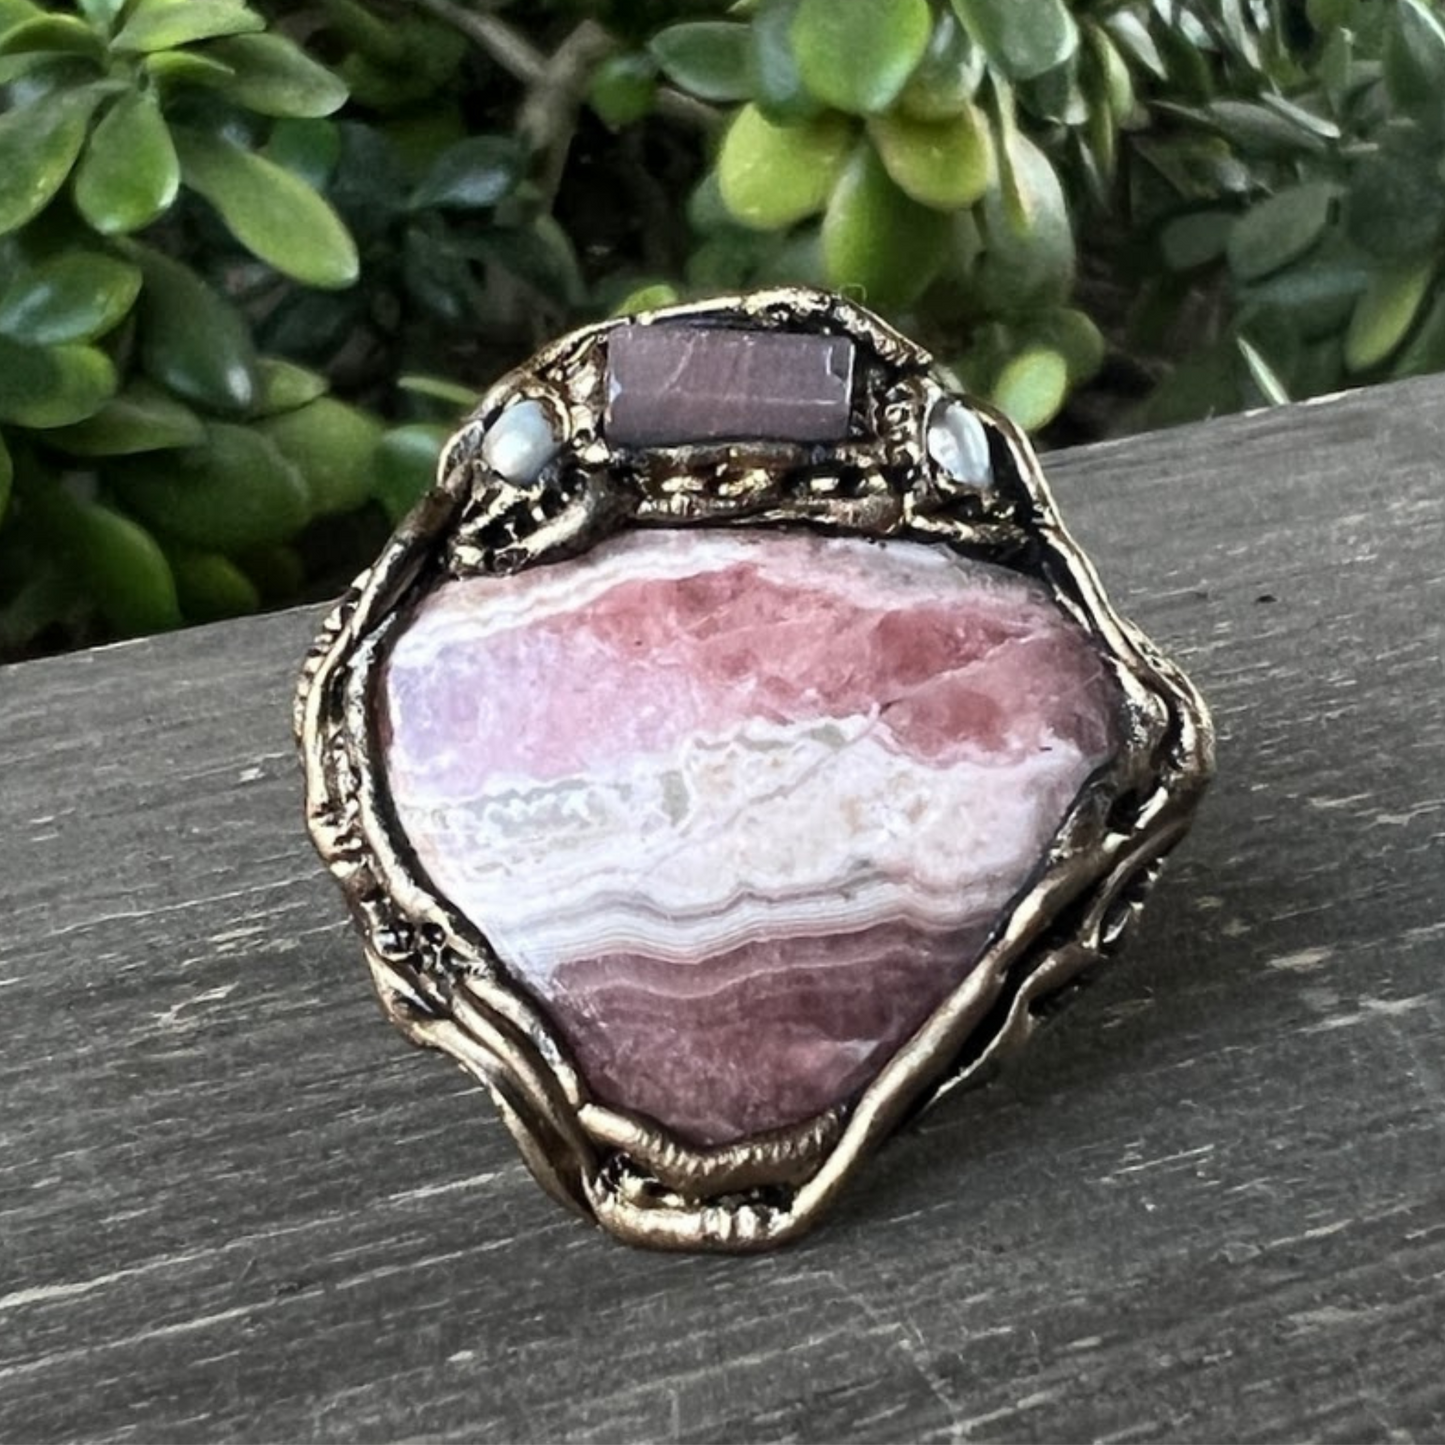 Rhodochrosite and Sunstone Large Chunky Ring - A Symbol of Love and Radiance